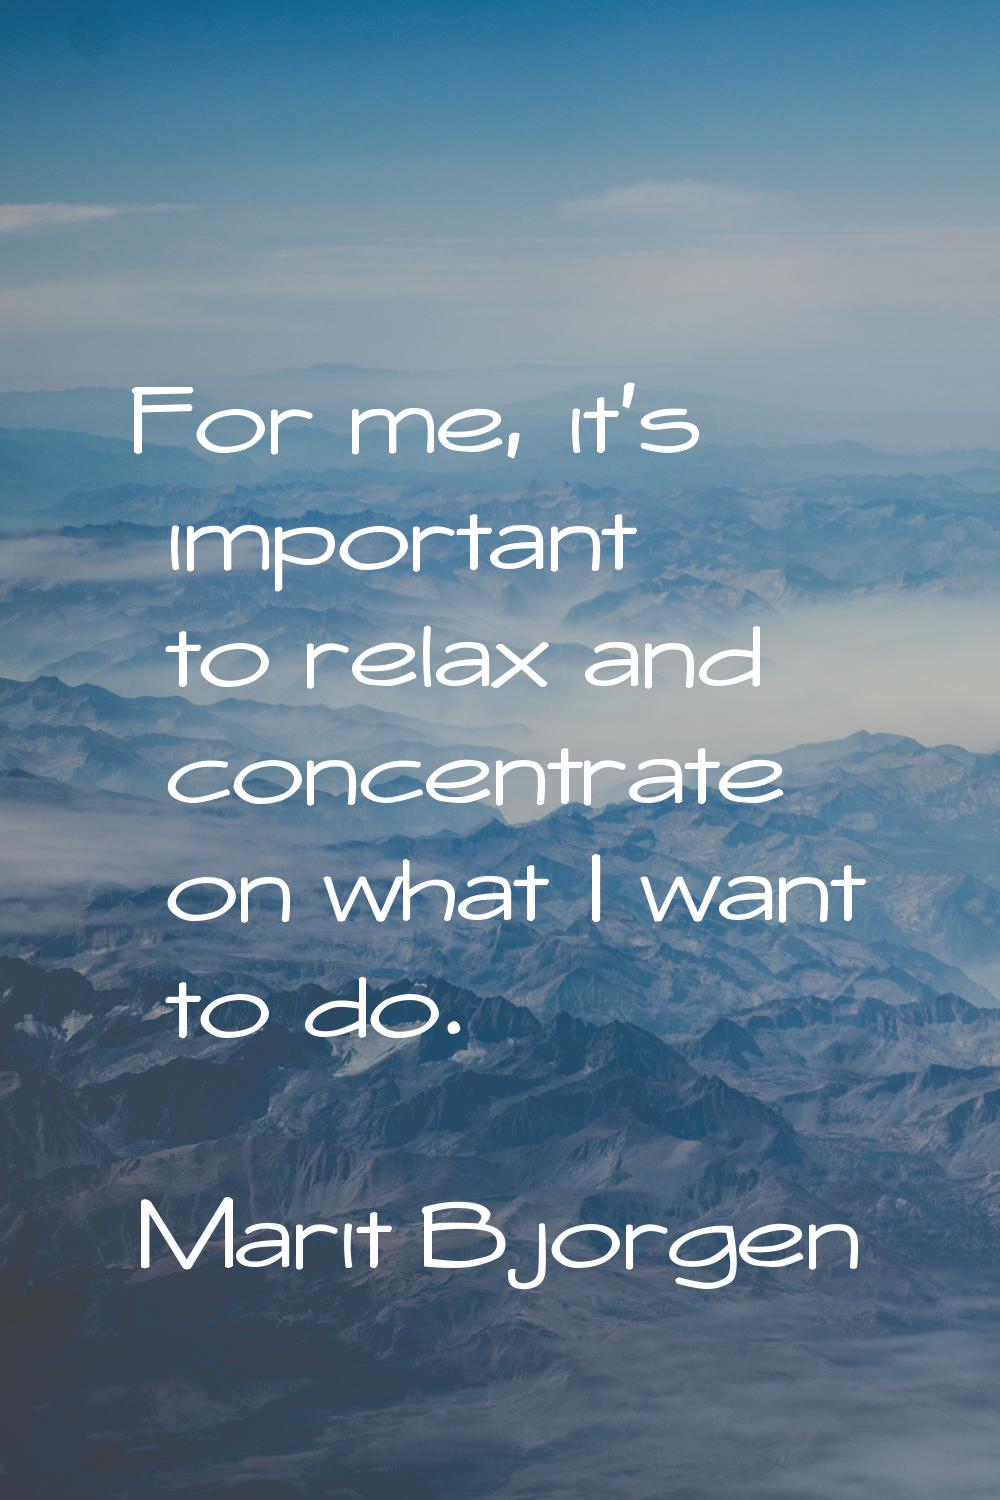 For me, it's important to relax and concentrate on what I want to do.